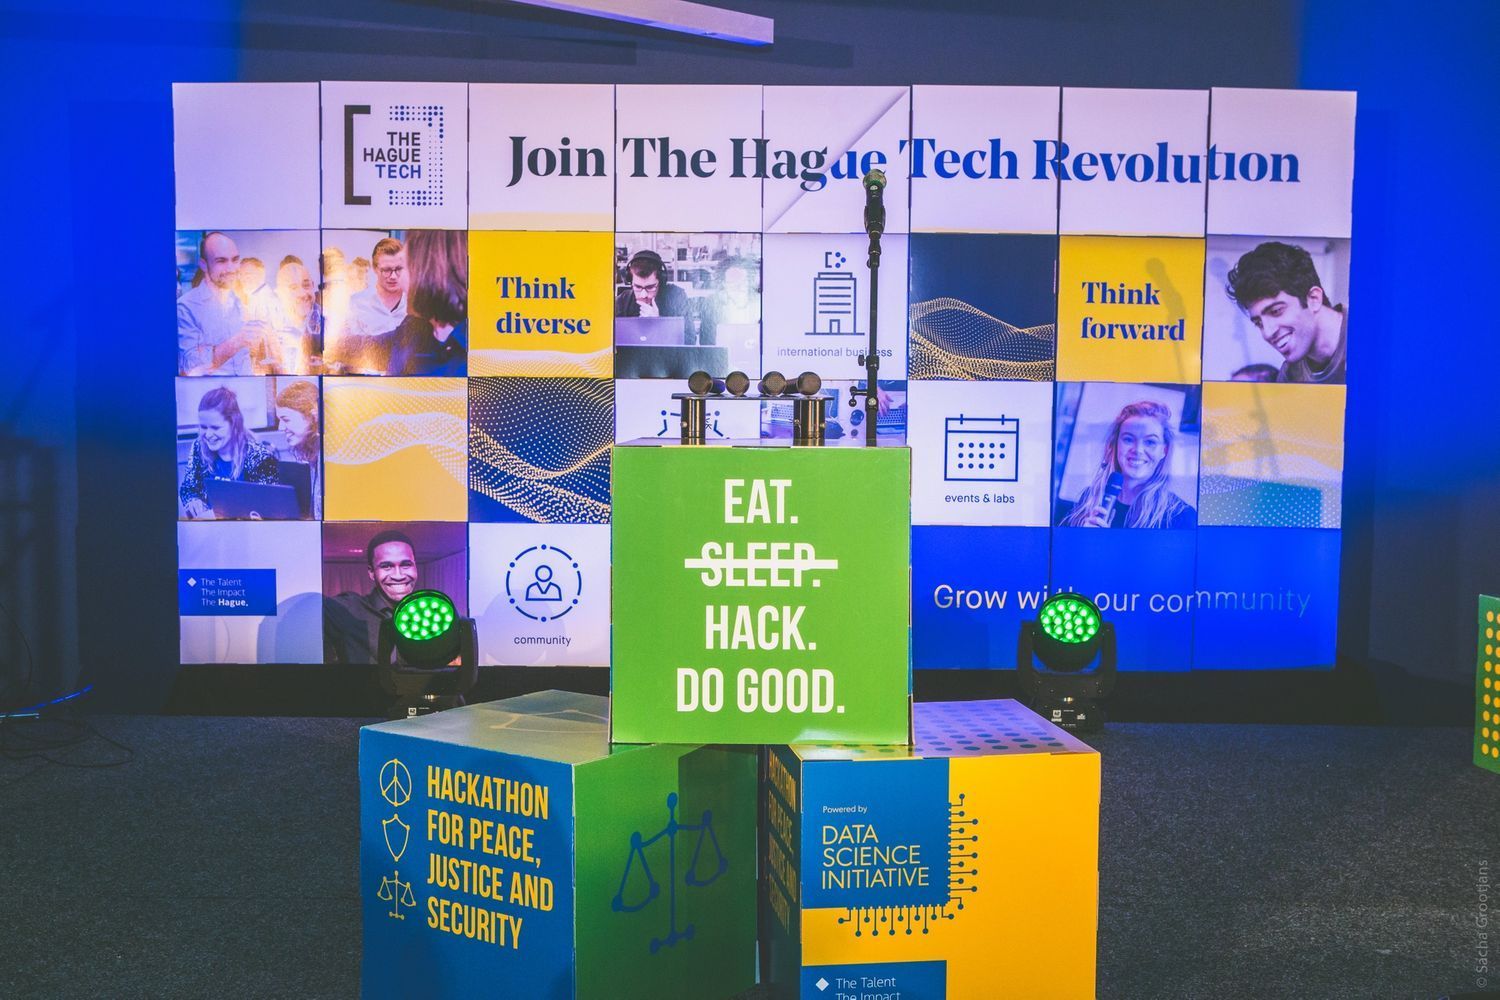 Bootleg Hackers wins 'Hackathon for Good The Hague 2020' with a Solution to Report Environmental Crimes